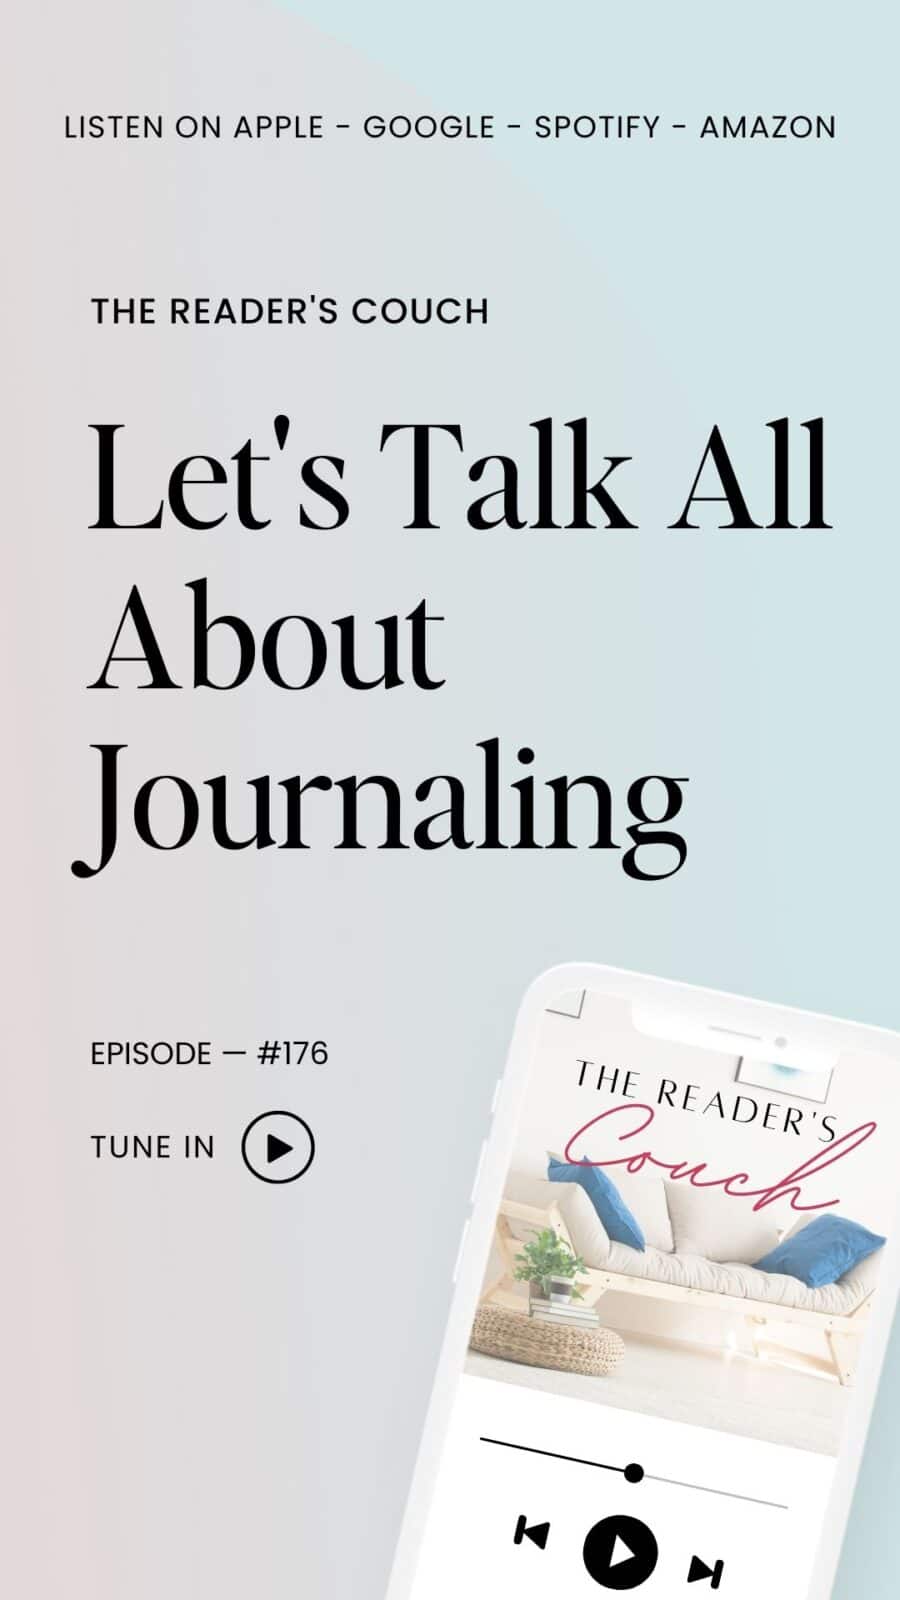 The Reader's Couch Podcast - Let's Talk All About Journaling